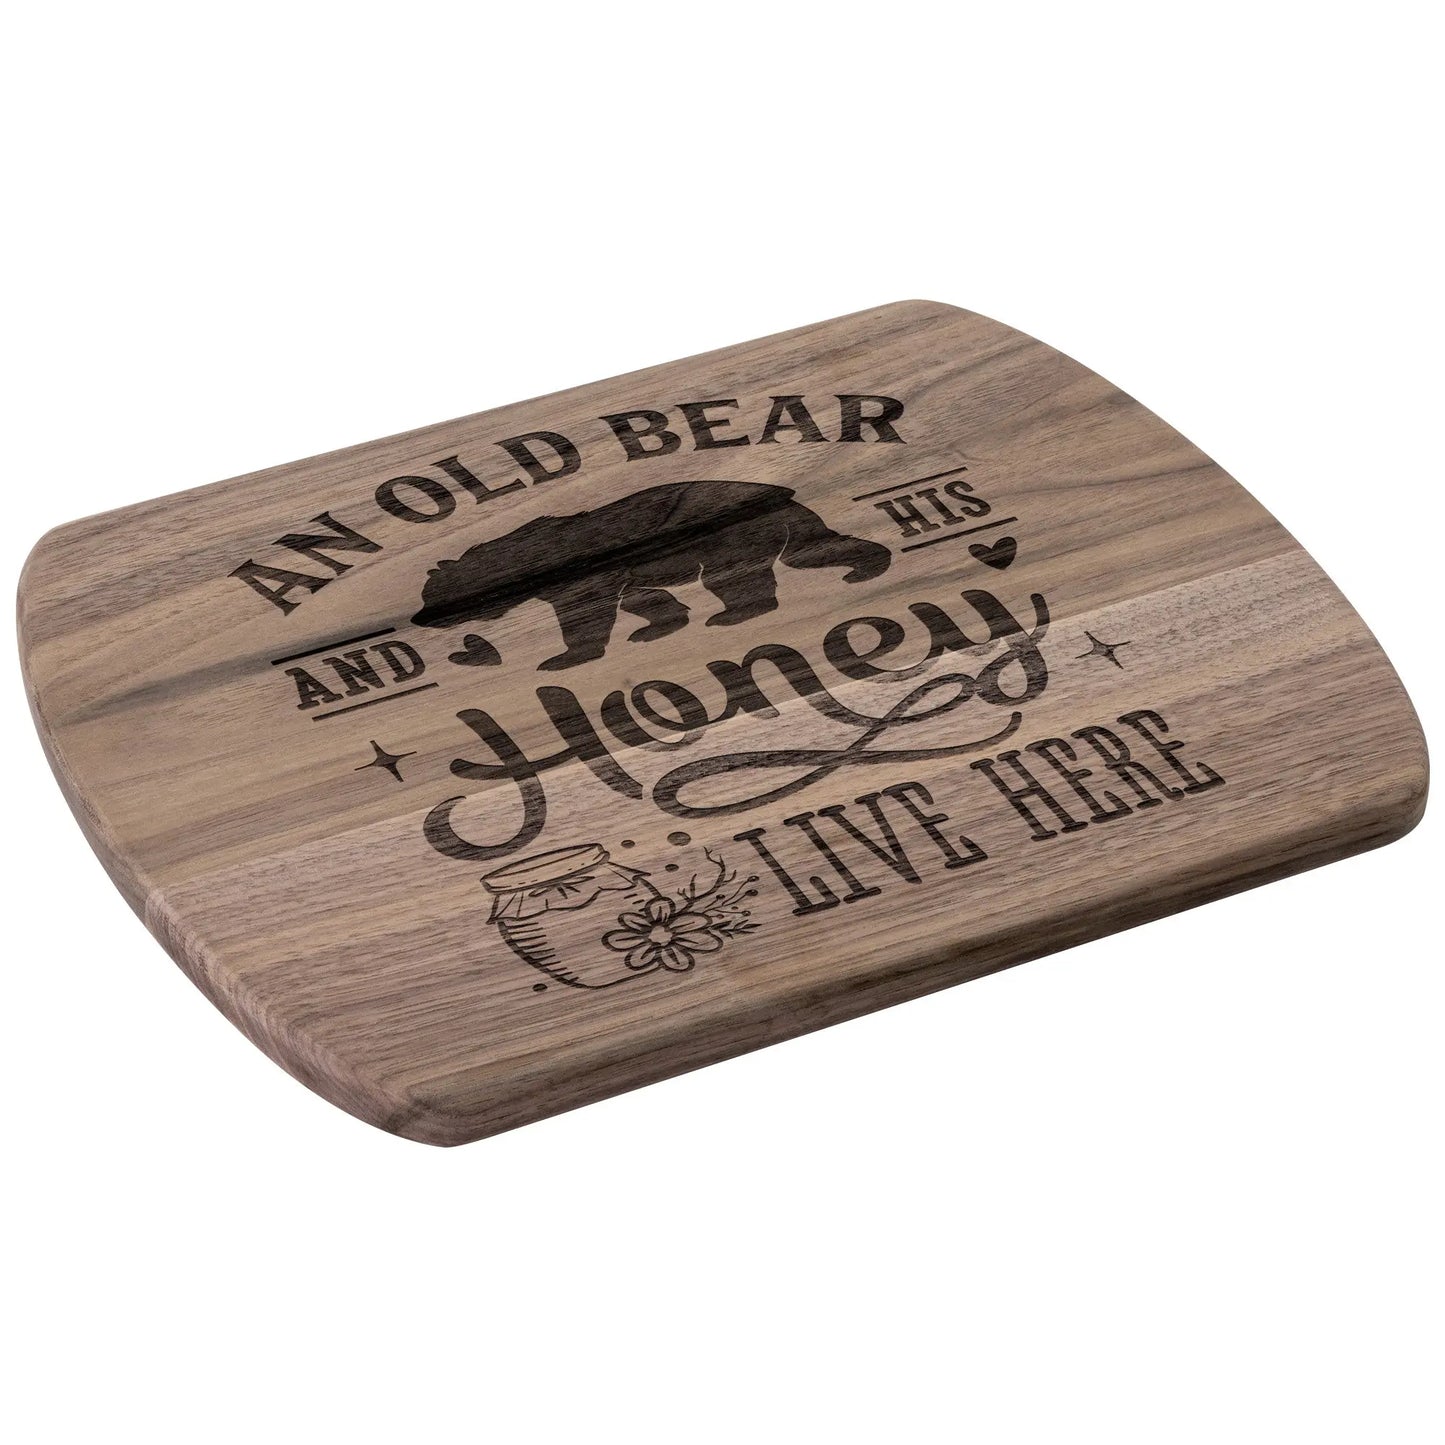 Old Bear and His Honey Wood Cutting Board, Cute Cutting Board, Grandpa Gift, Grandma Gift teelaunch